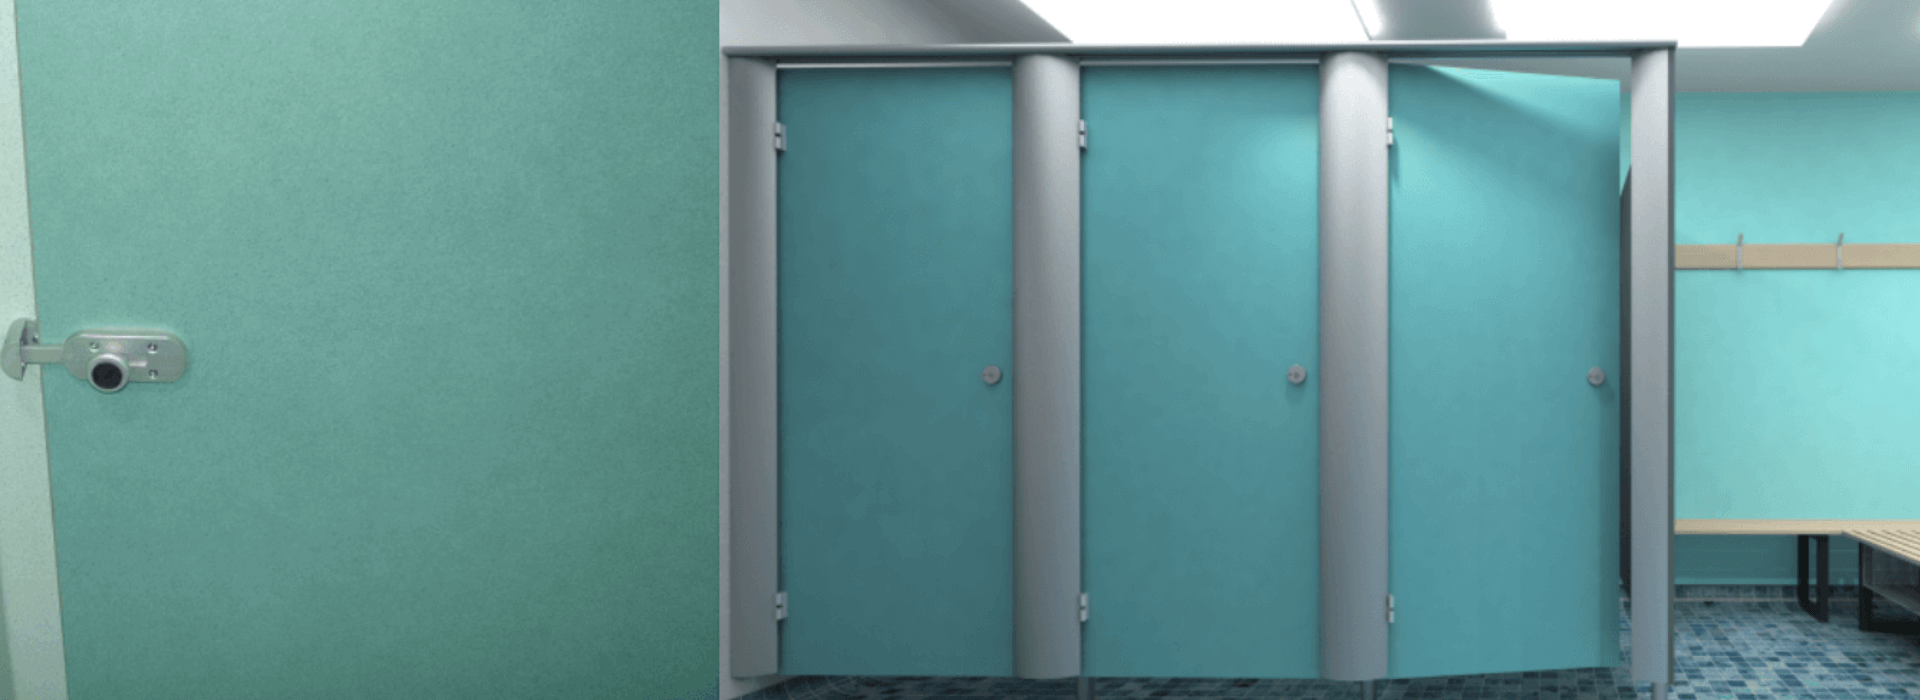 We offer an extensive range of cubicle fittings suitable for Toilet, washroom, Changing or Shower Cubicle Applications As well as complete cubicle systems and cubicle fitting packs.